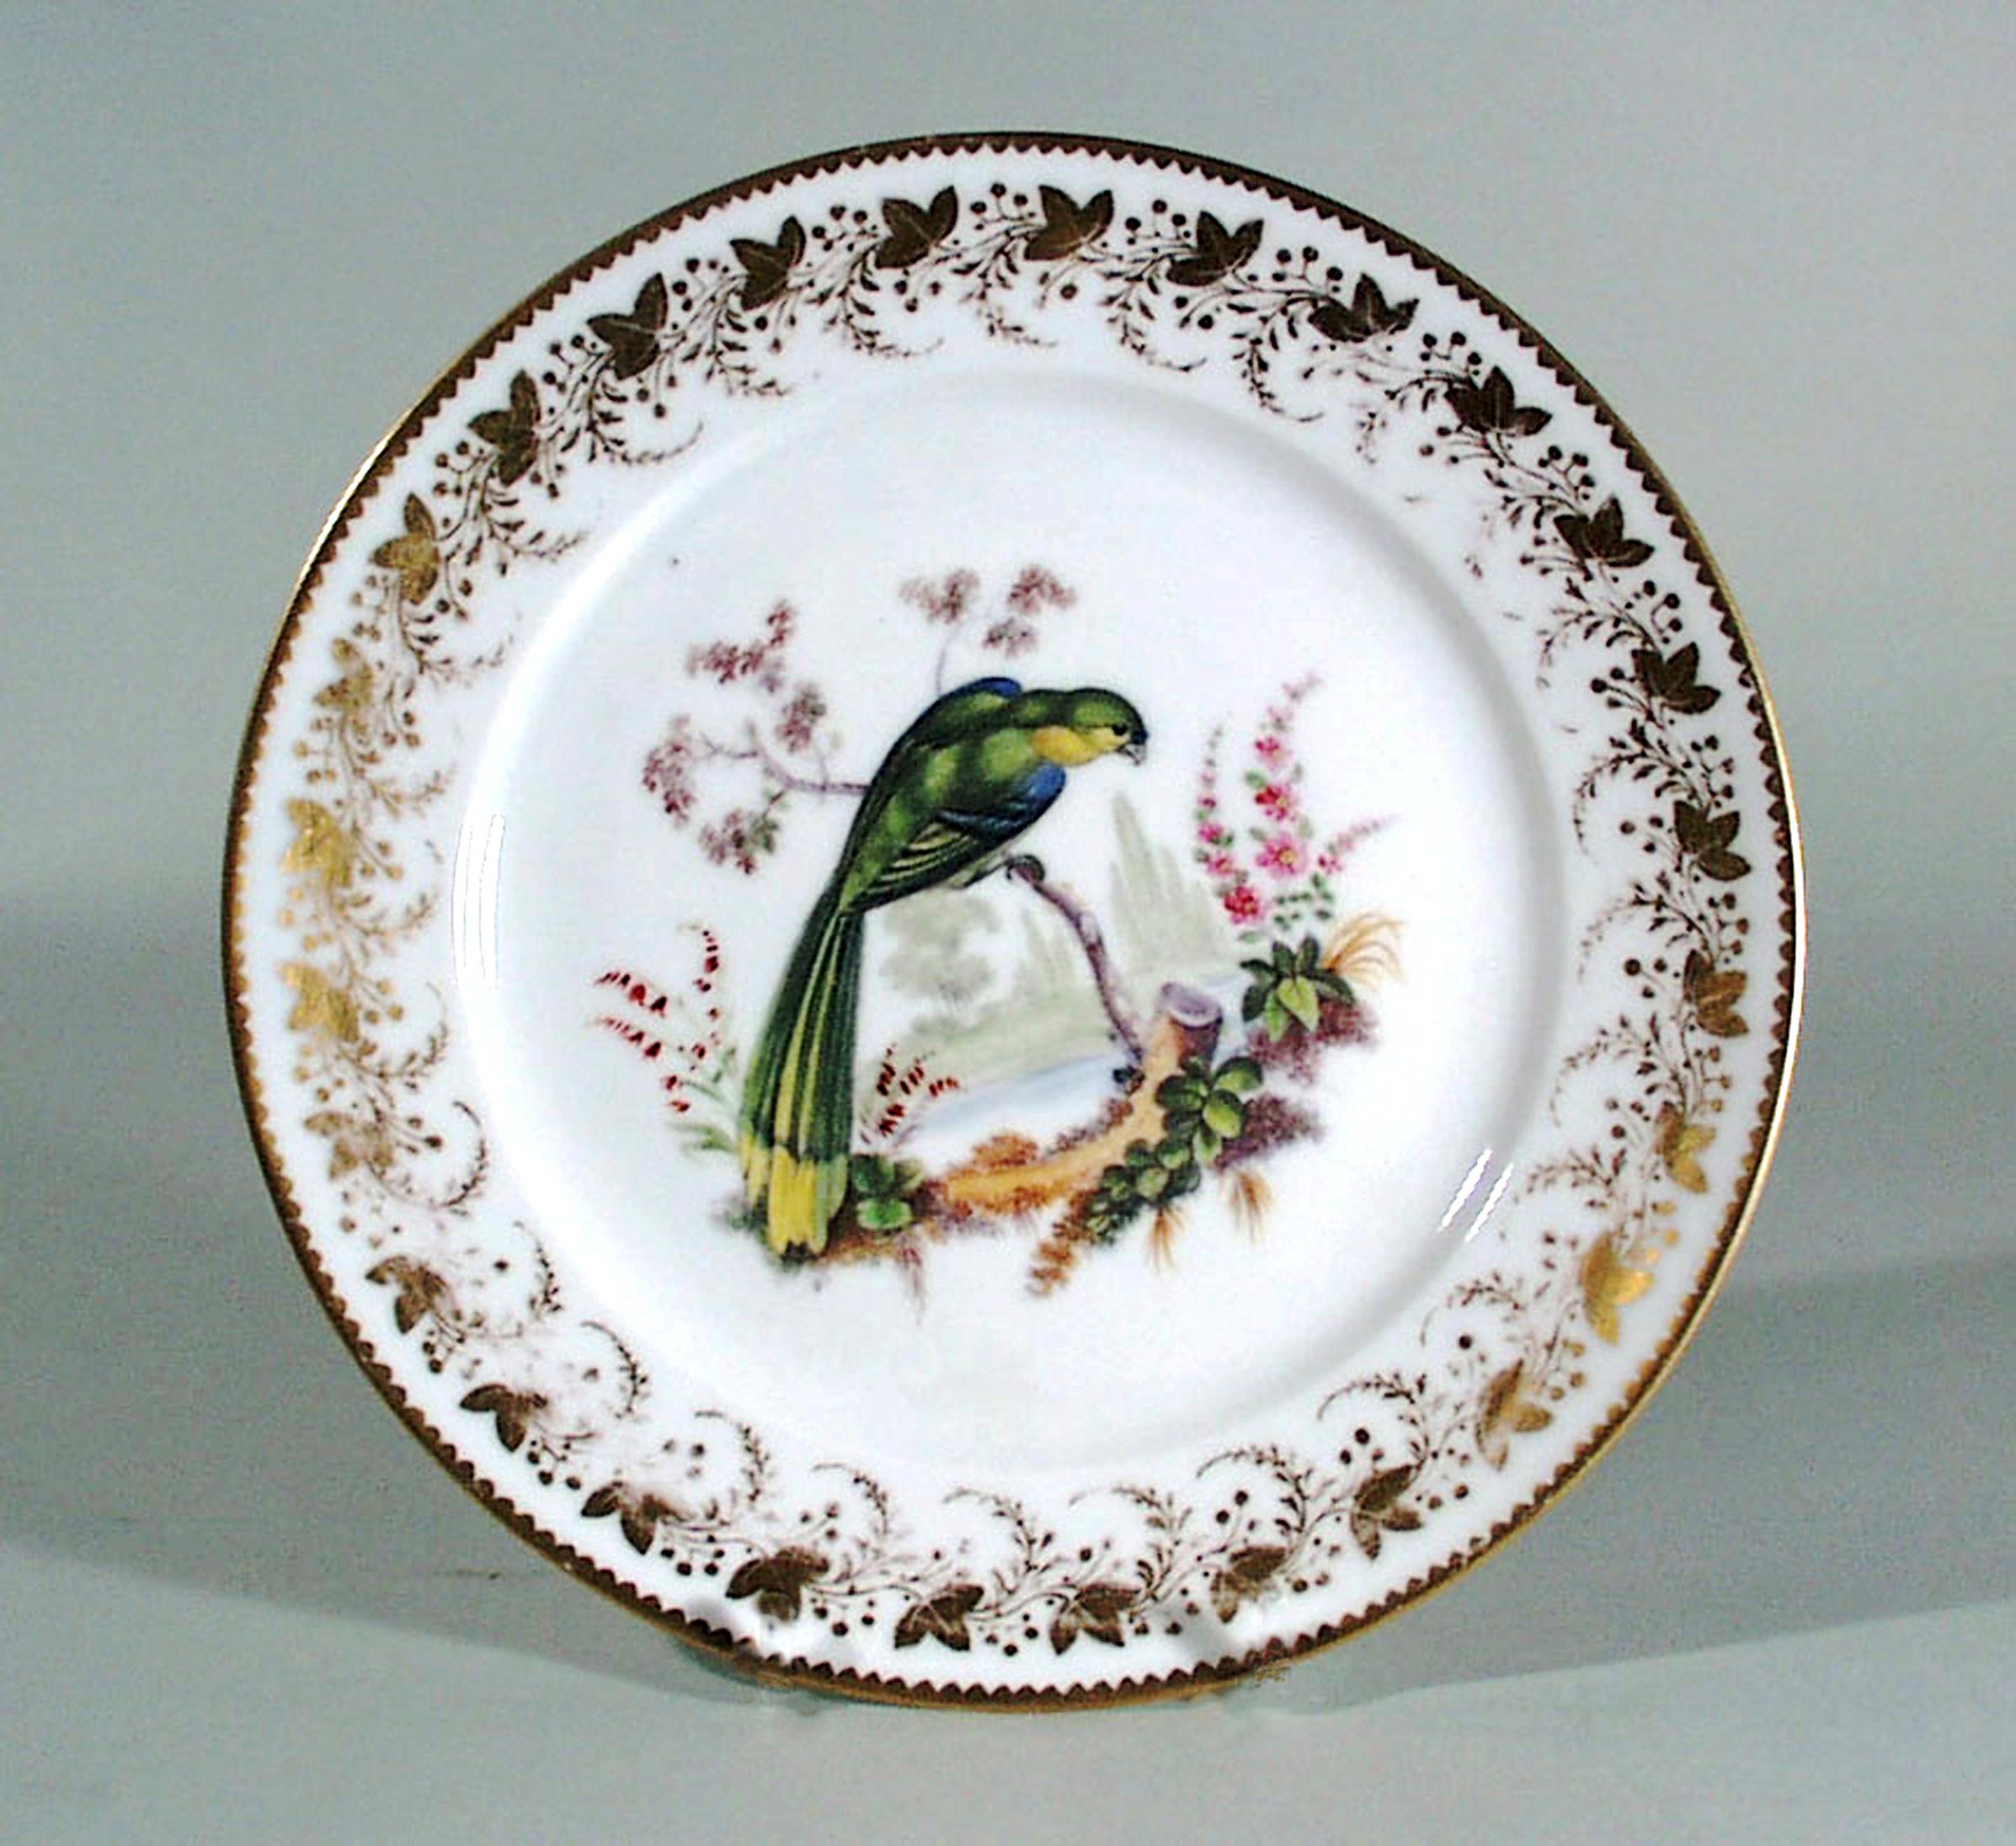 Antique London-Decorated Paris Porcelain Plate Probably by Thomas Randall 2